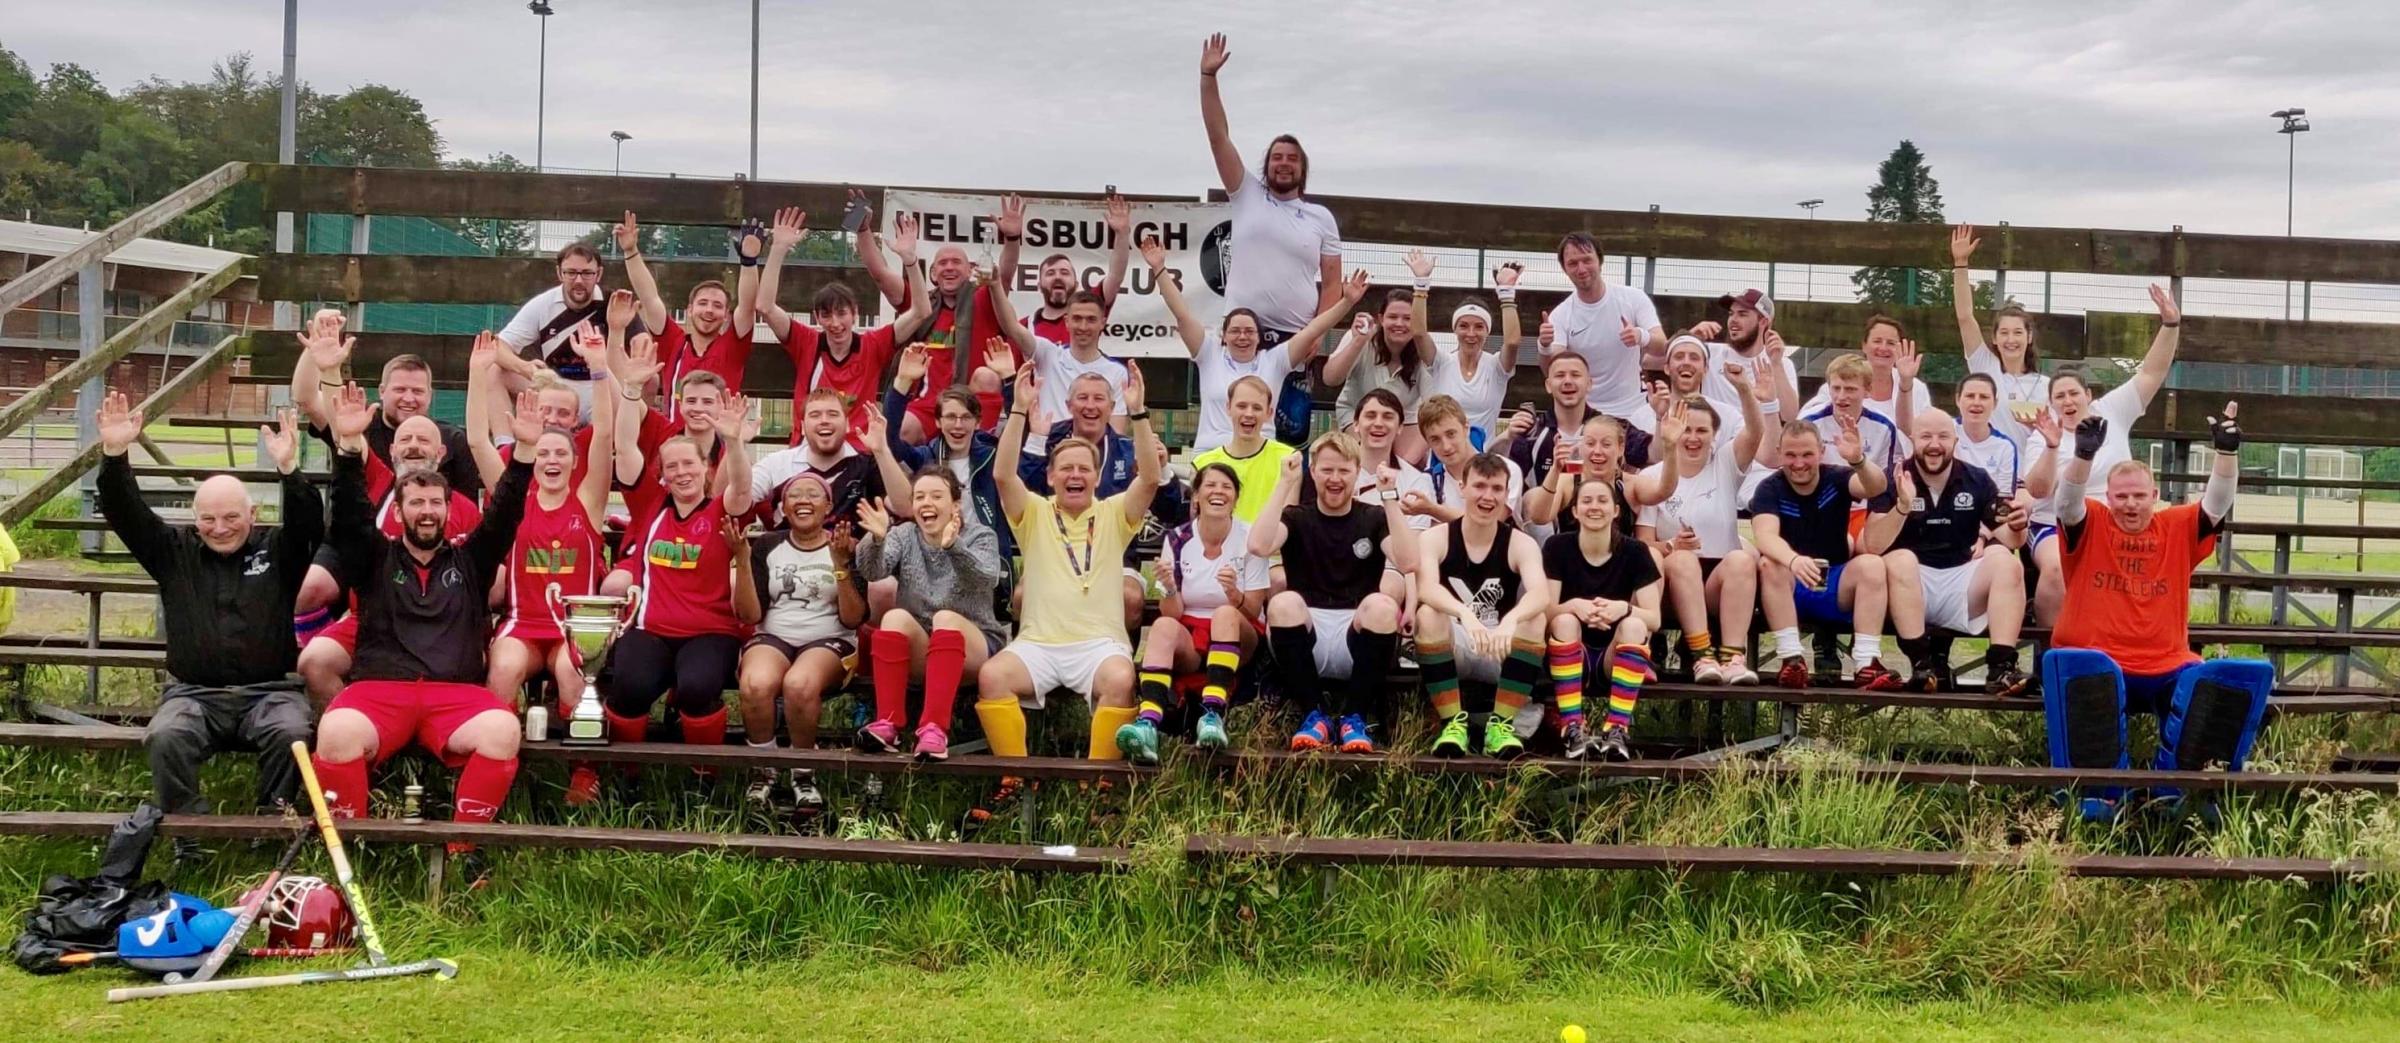 The Helensburgh and Loch Lomond Hockey Fling is back on the weekend of July 1 and 2